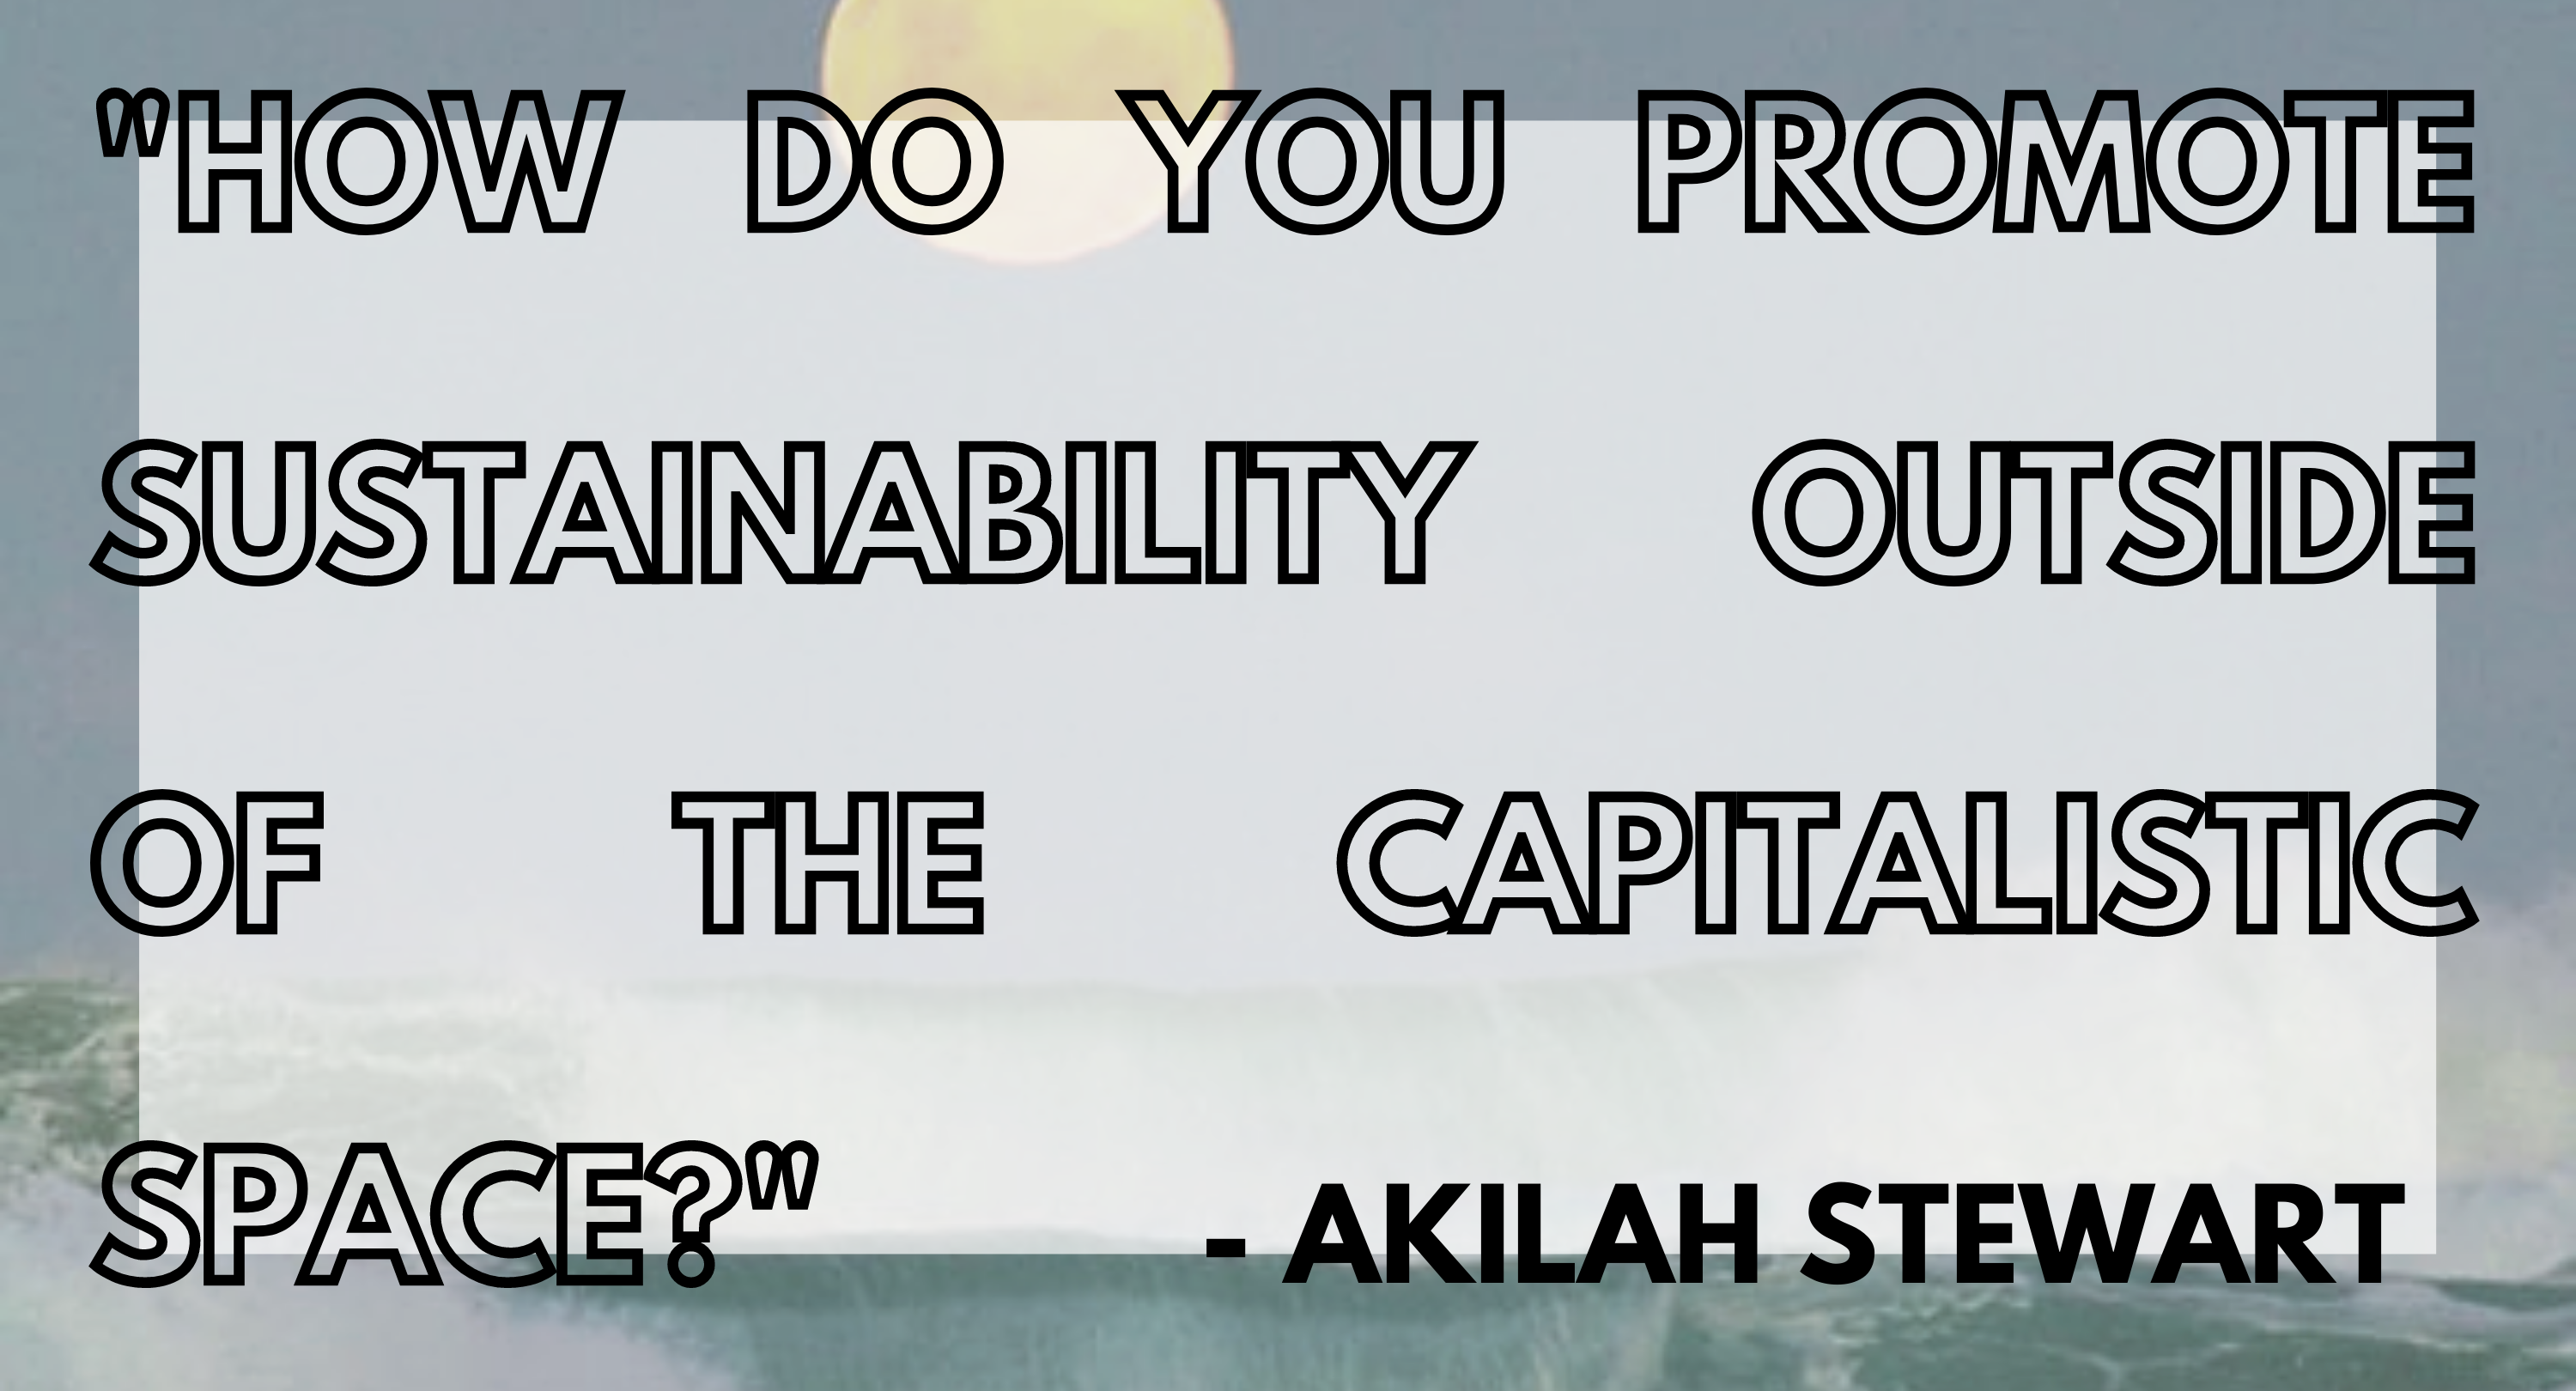 Quote from Akilah Stewart, founder of FATRA